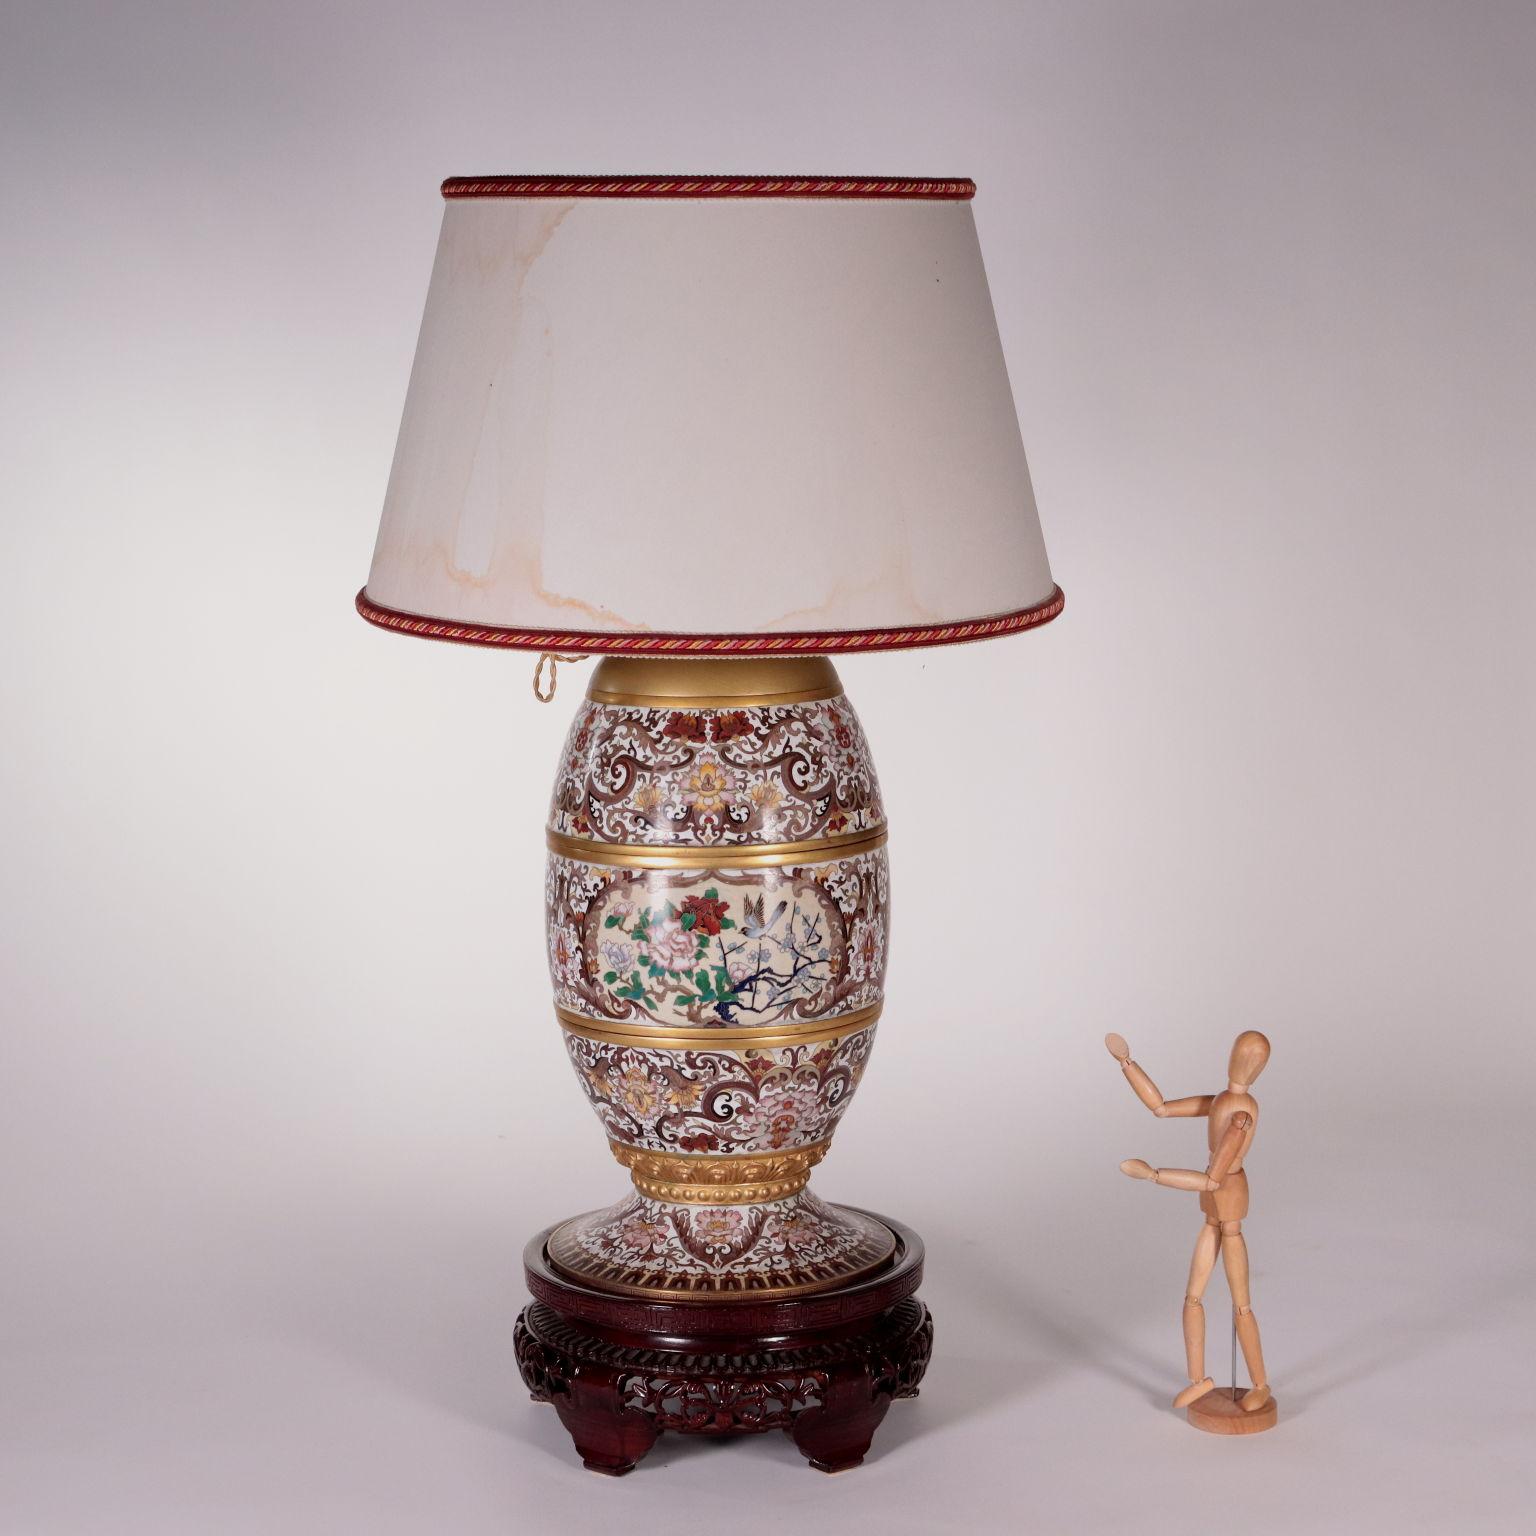 Bronze and cloisonnè enamel modular lamp. Decoration all-over with plant and animal patterns, peonies and other tipes of flowers. Pierced wood round support.